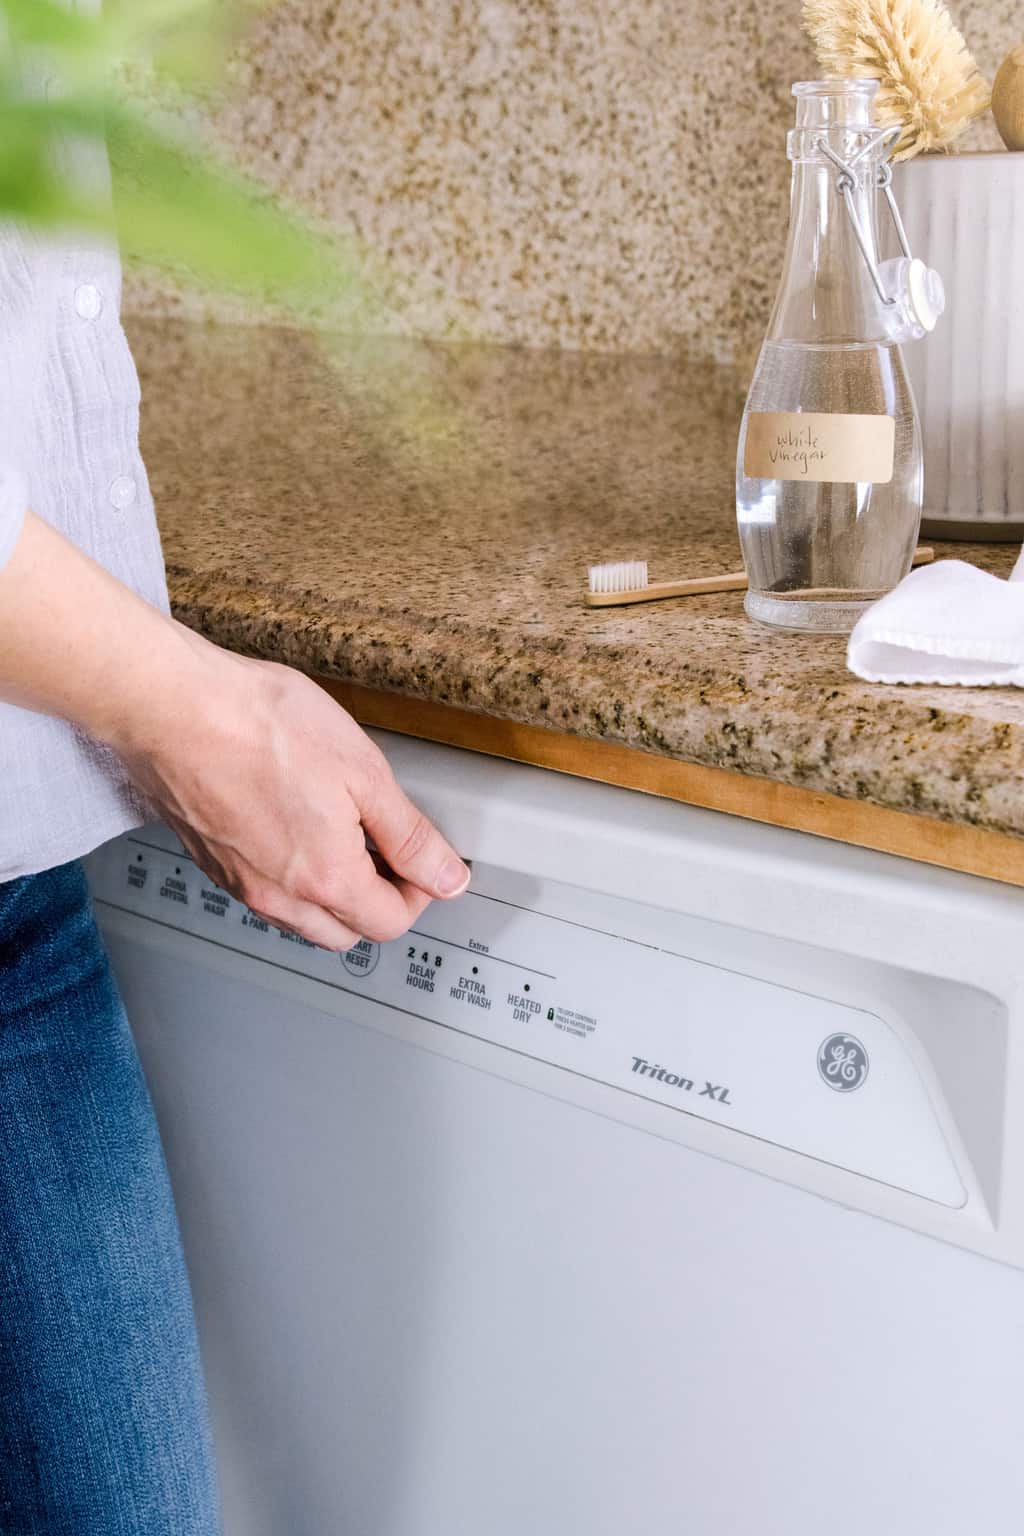 How to clean a dishwasher in 5 easy steps